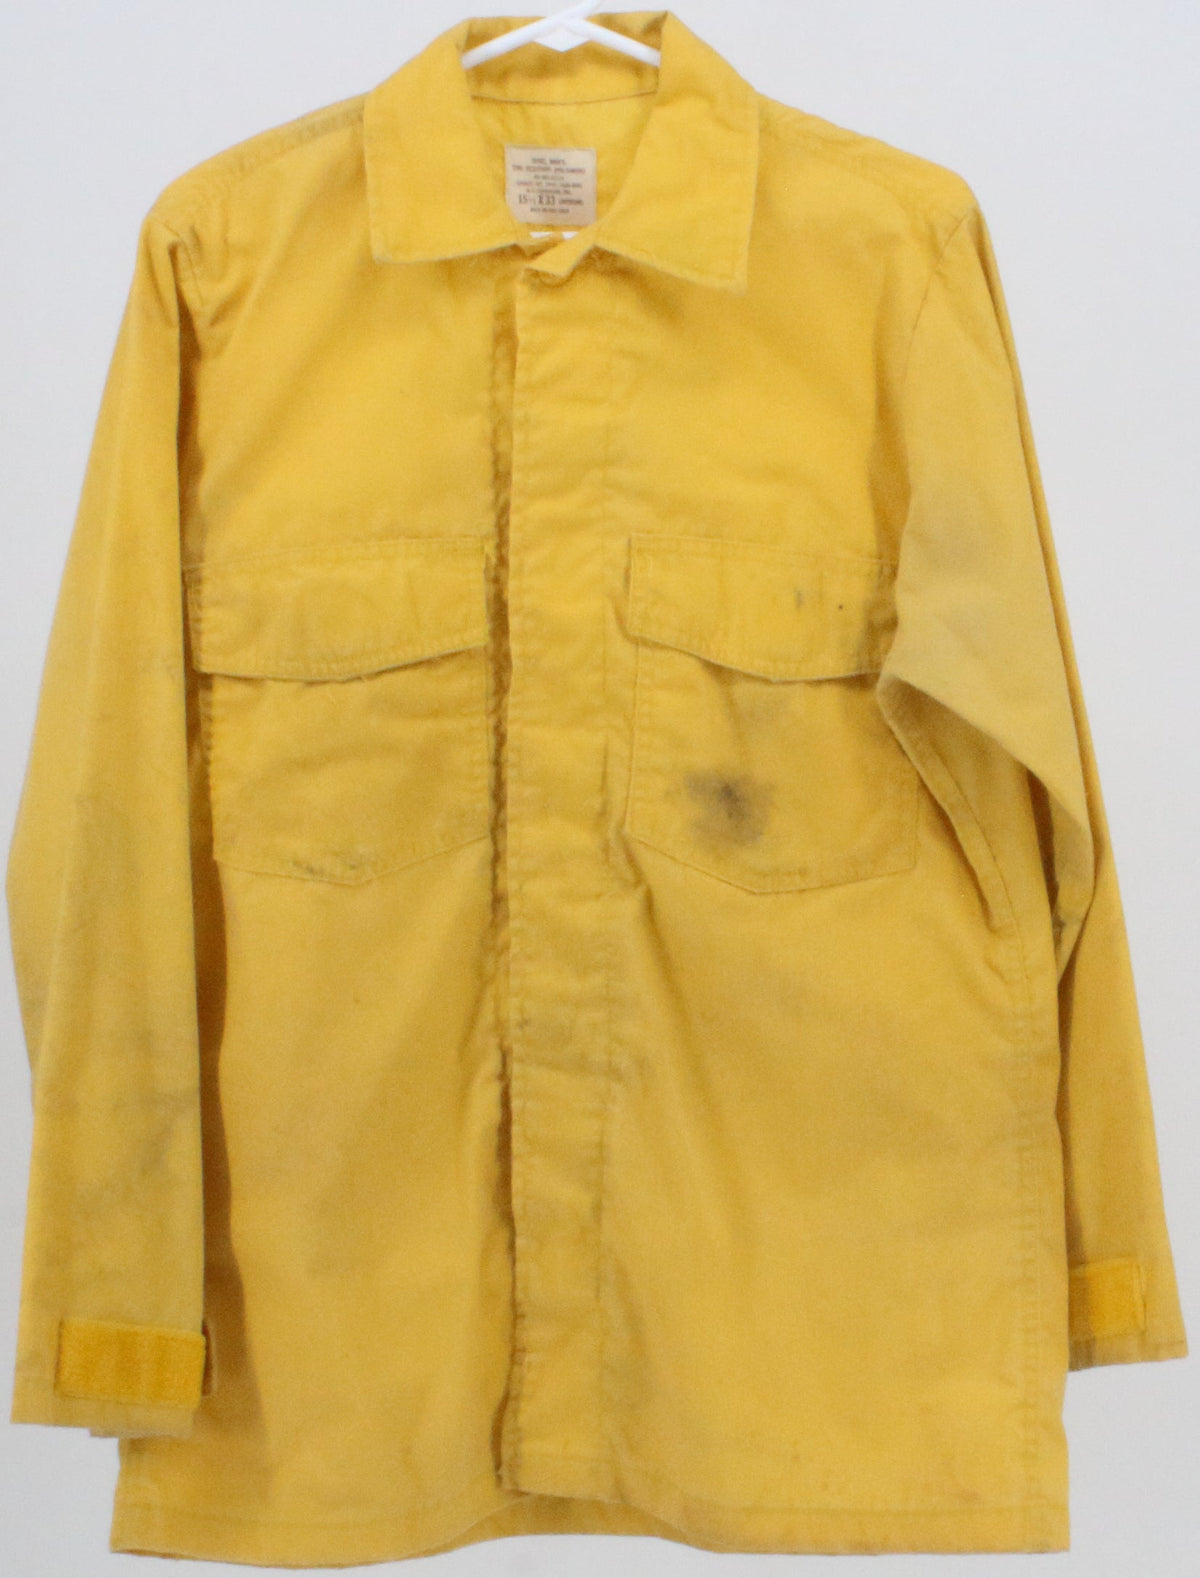 Flathead National Forest Fire Resistant Yellow Shirt